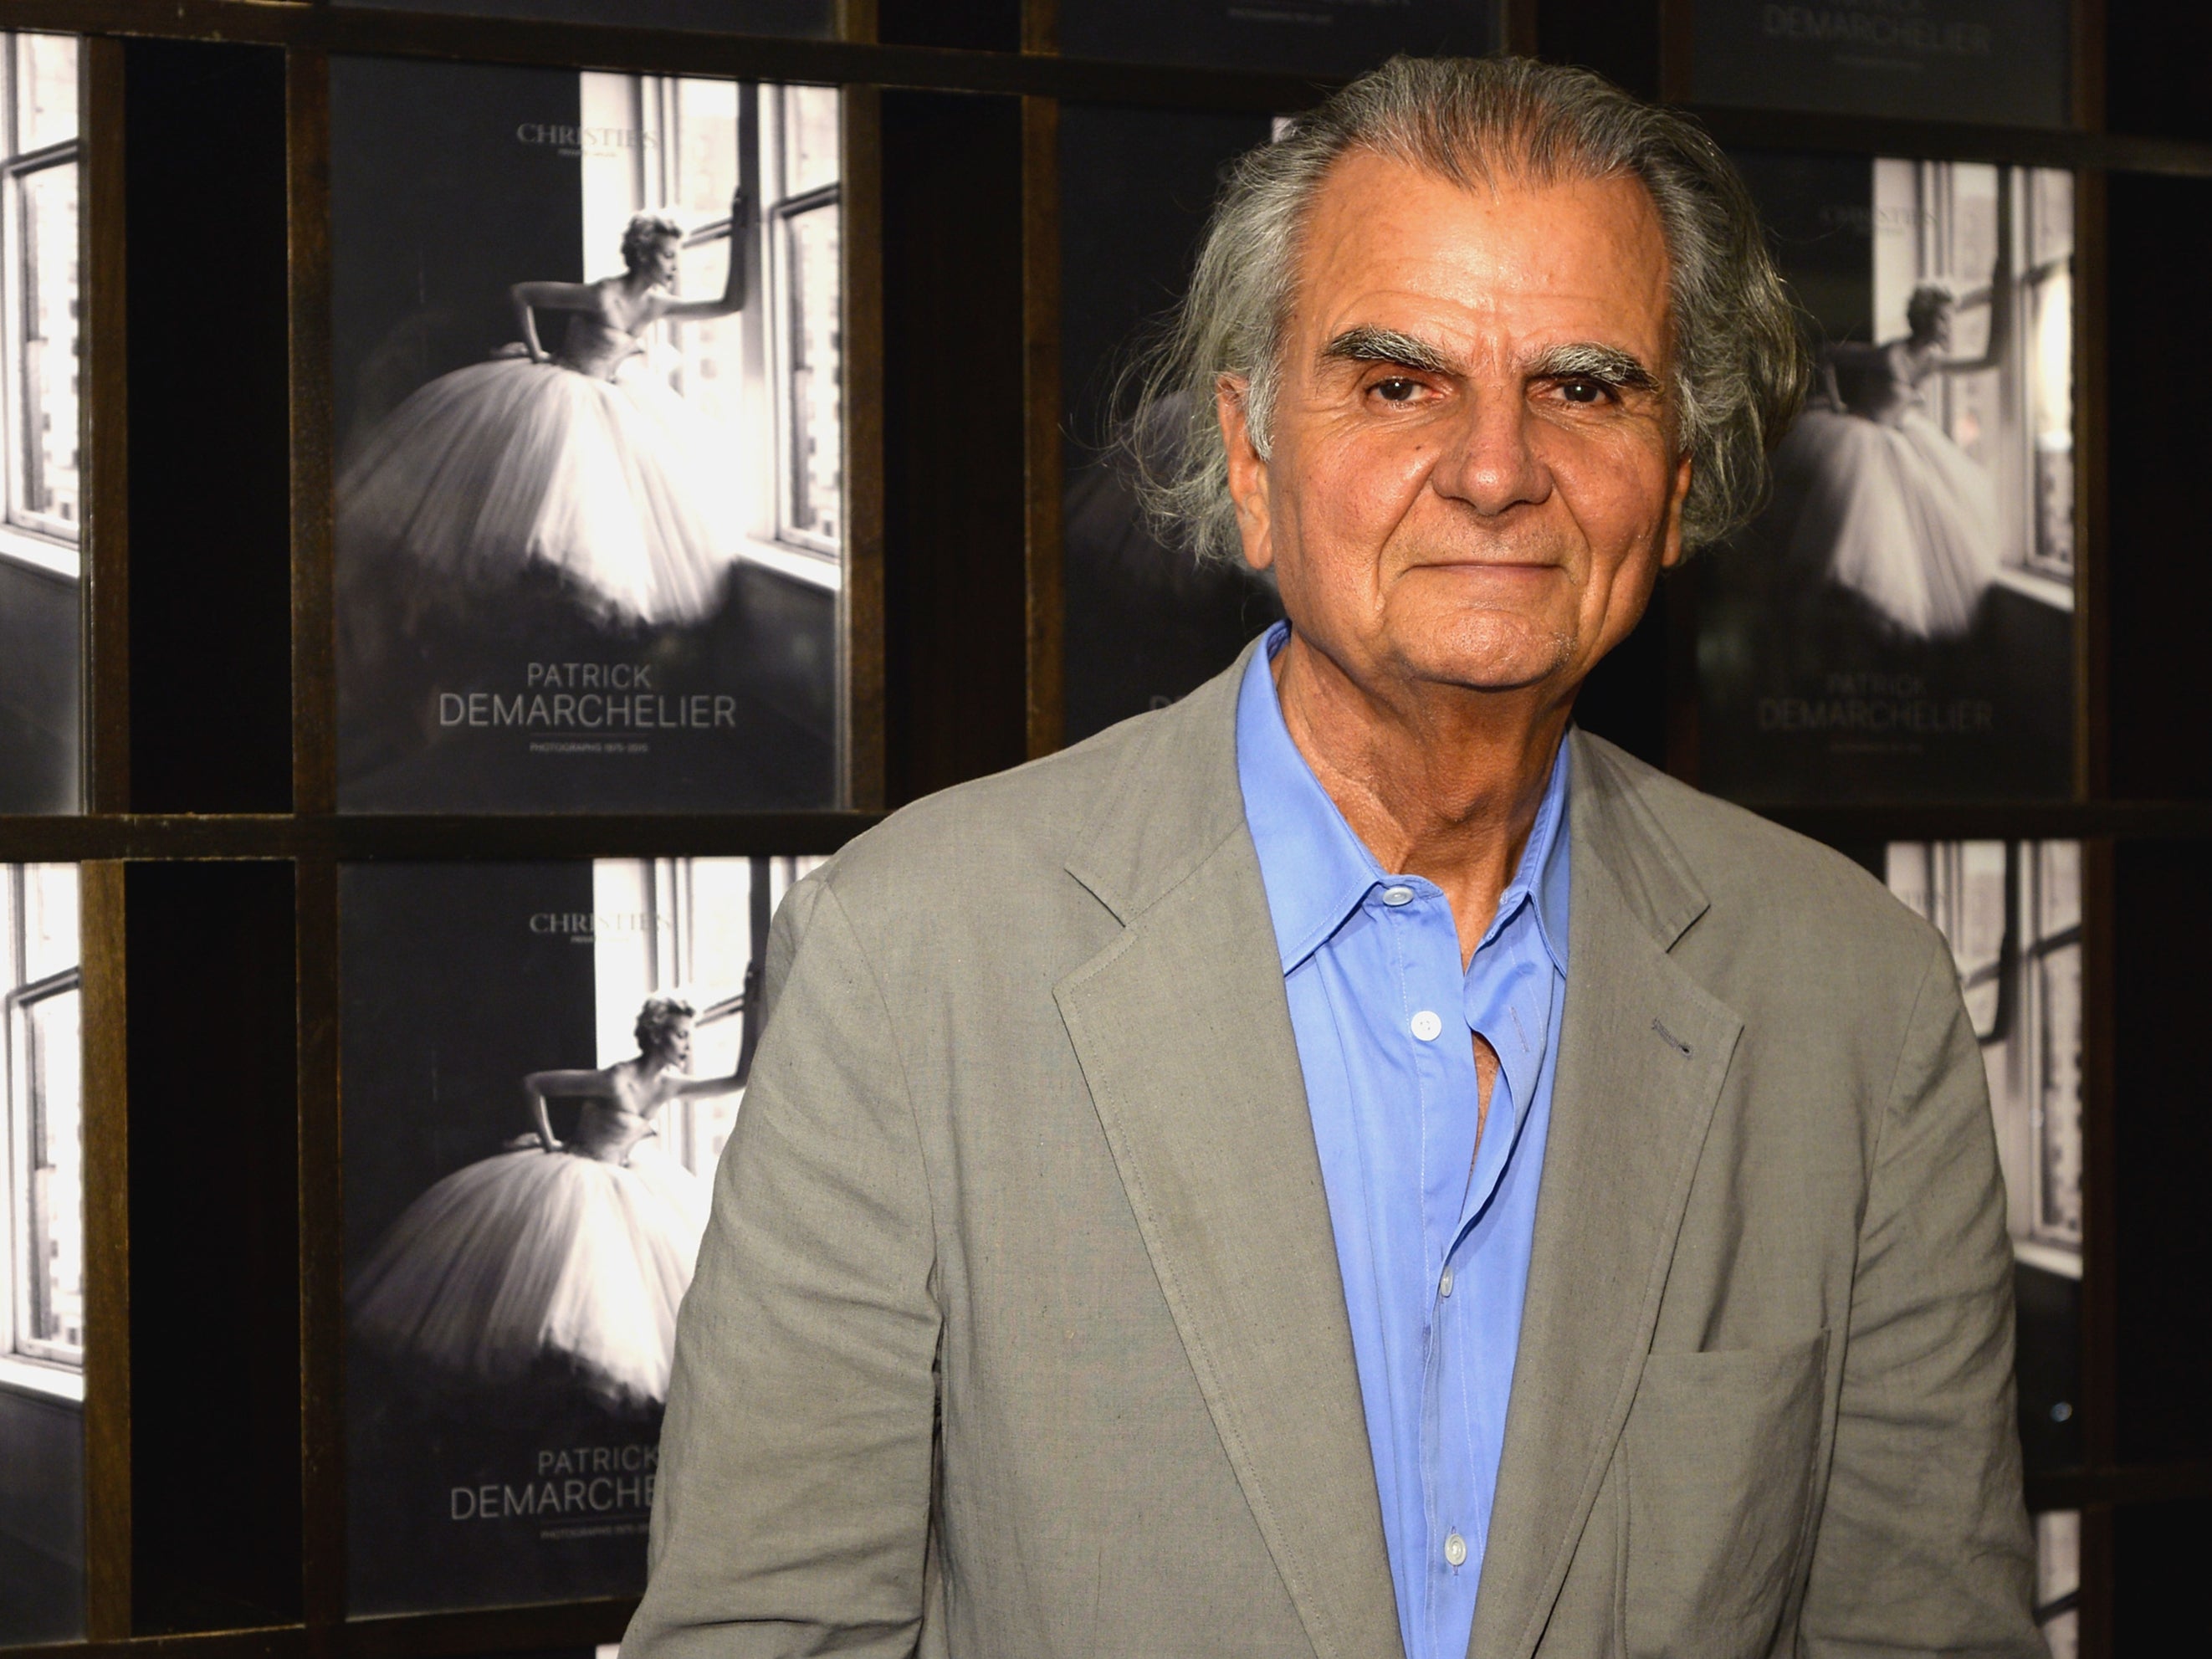 Patrick Demarchelier passed away on Thursday 31 March